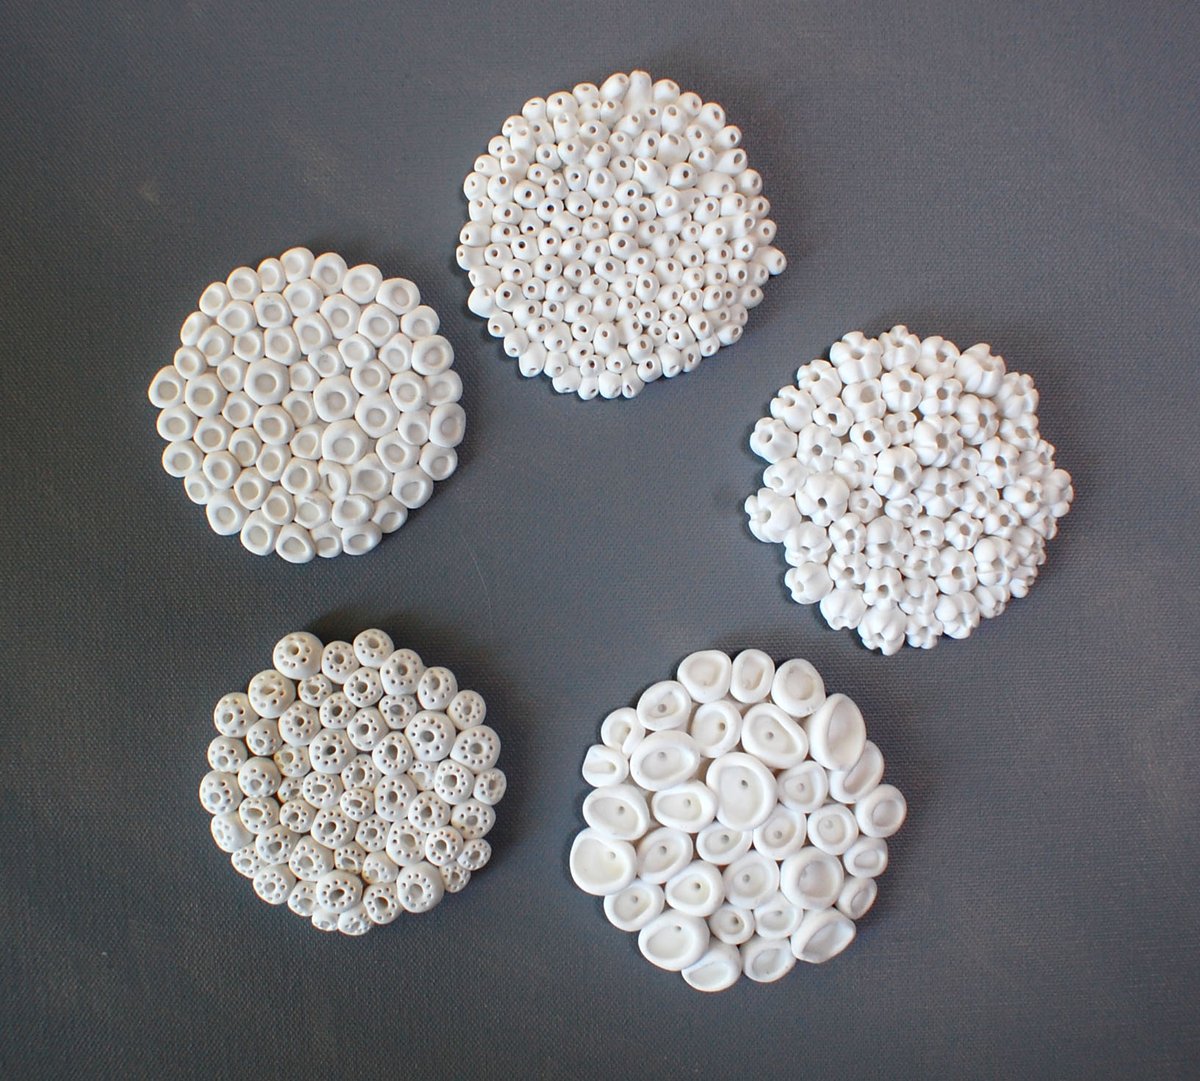 The white coral wall sculptures wall art set of 5 is the perfect accent for a beach house or perhaps a bathroom with an ocean inspired theme.The barnacles, finger coral and more are all inspired by endangered coral. etsy.me/3leOPa6 #coral #coralreef #reefart #homedecor